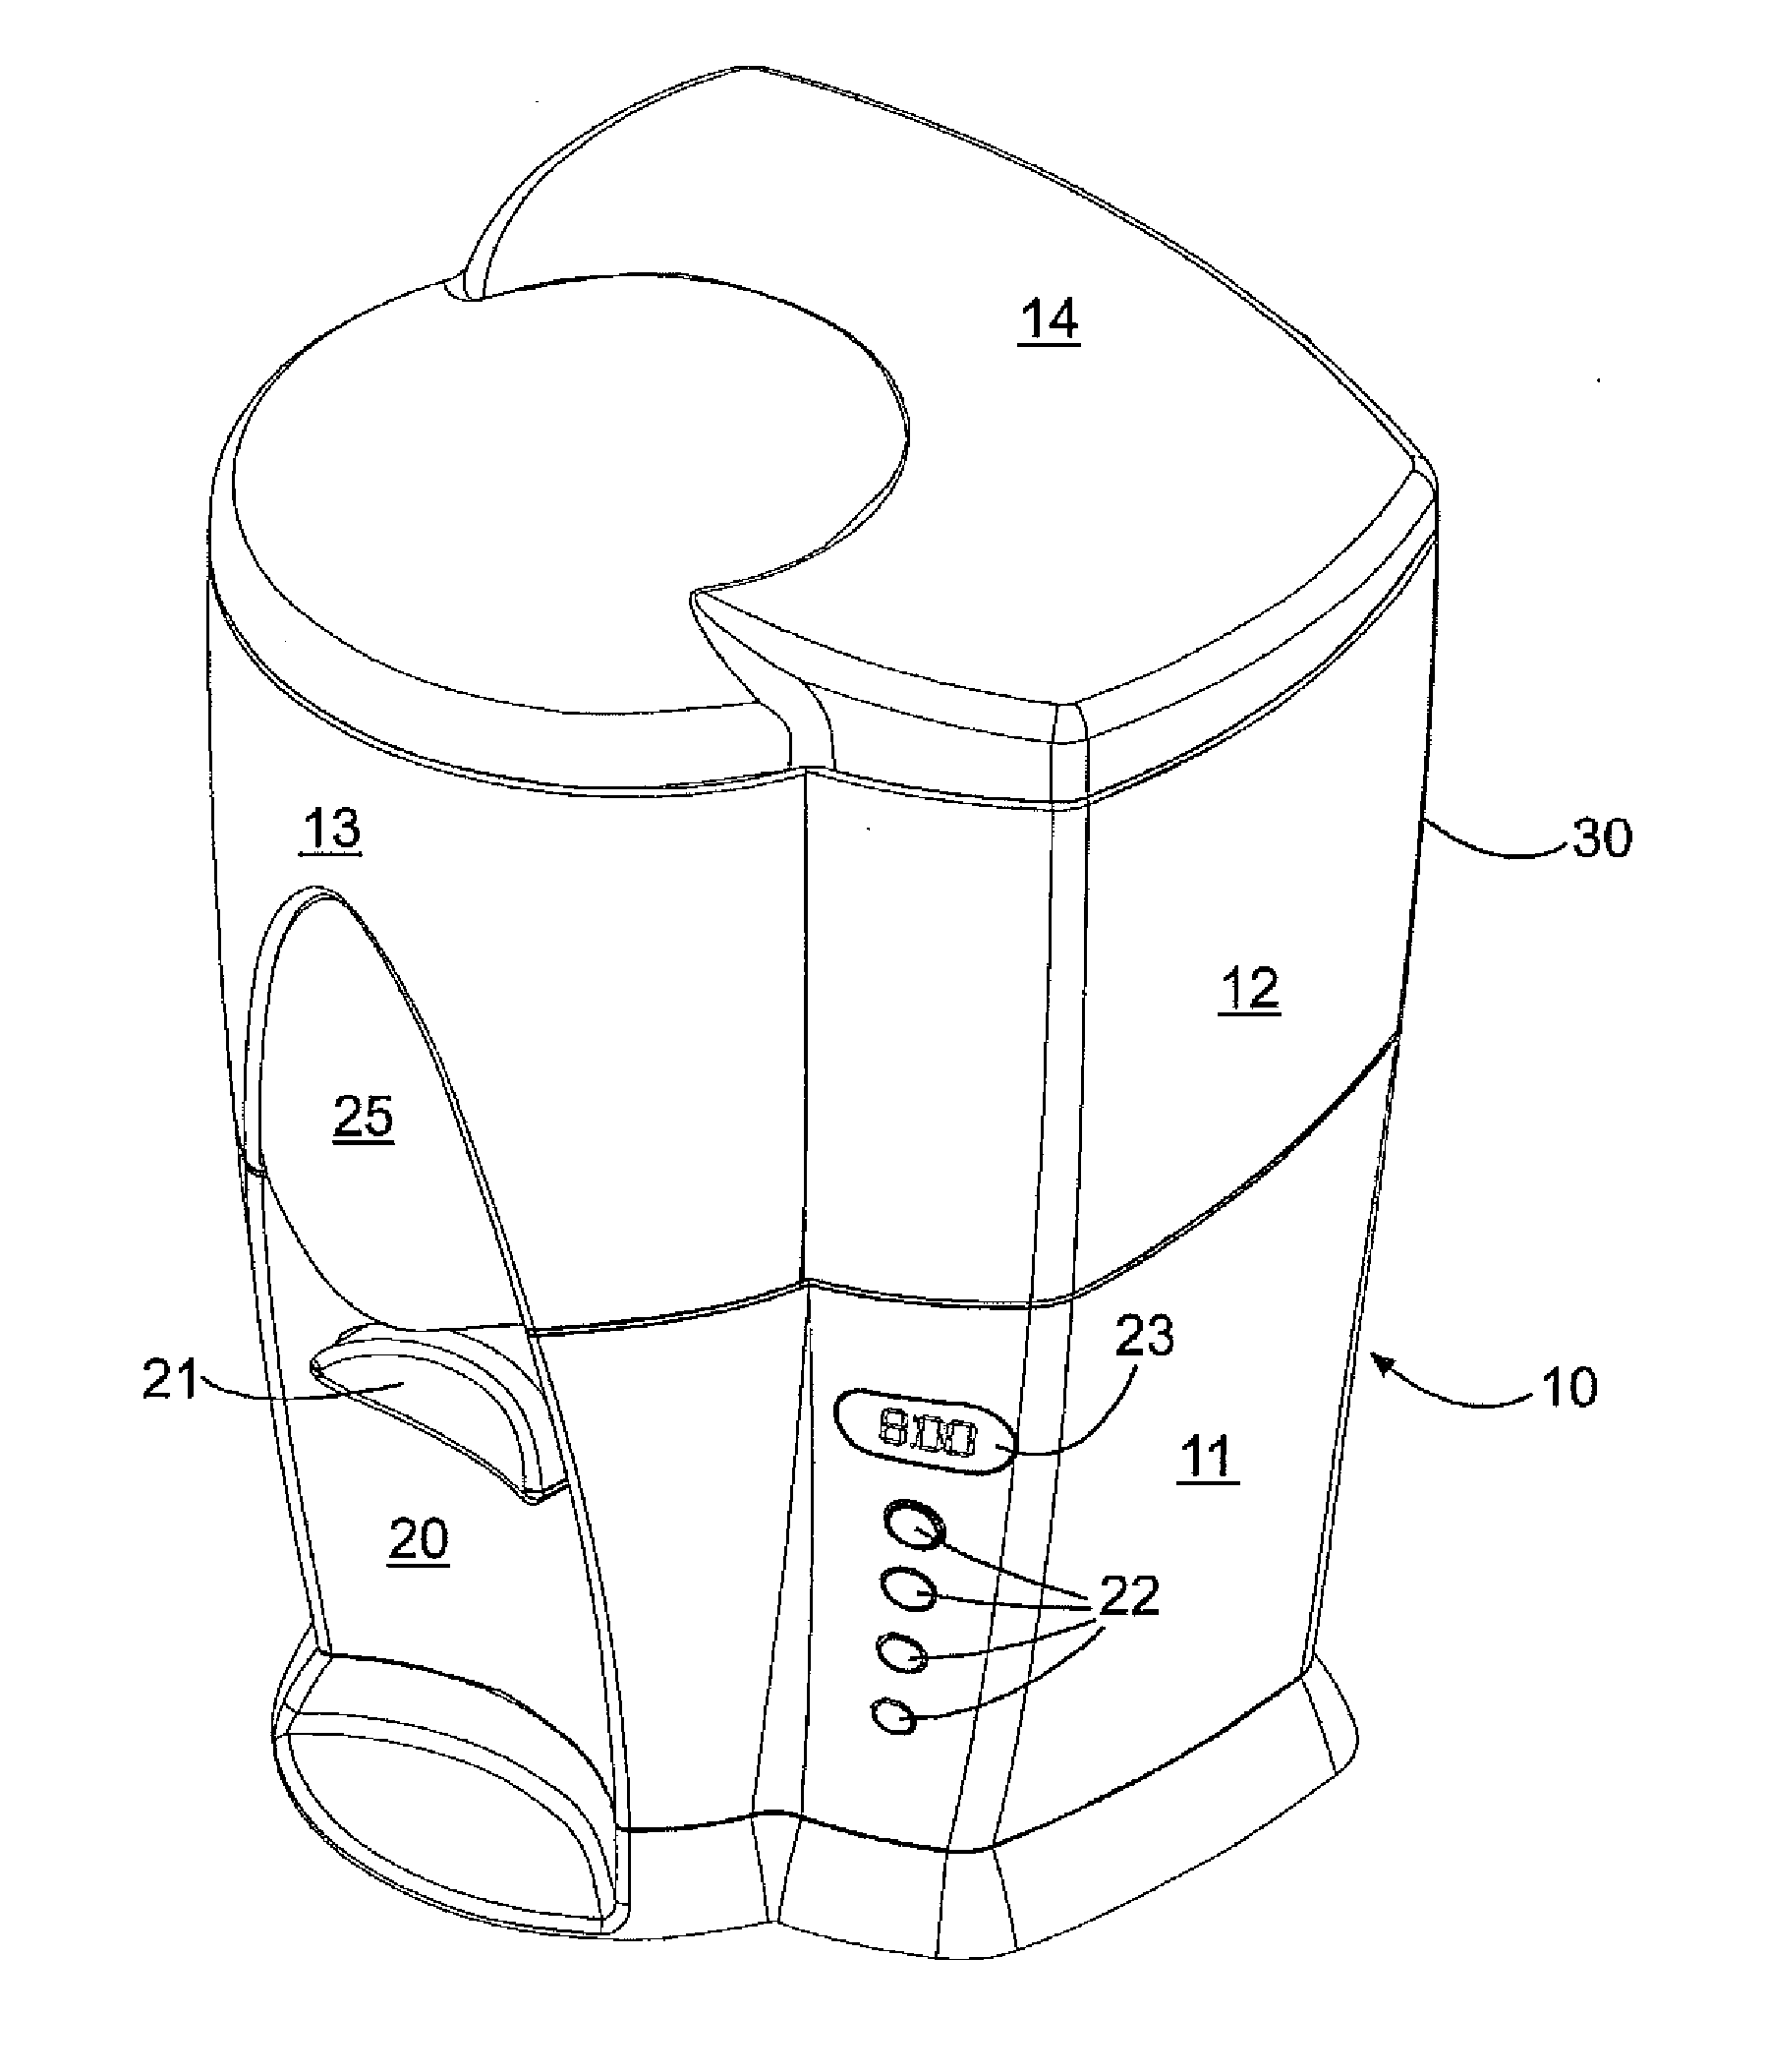 Hot beverage maker with cup-actuated dispenser